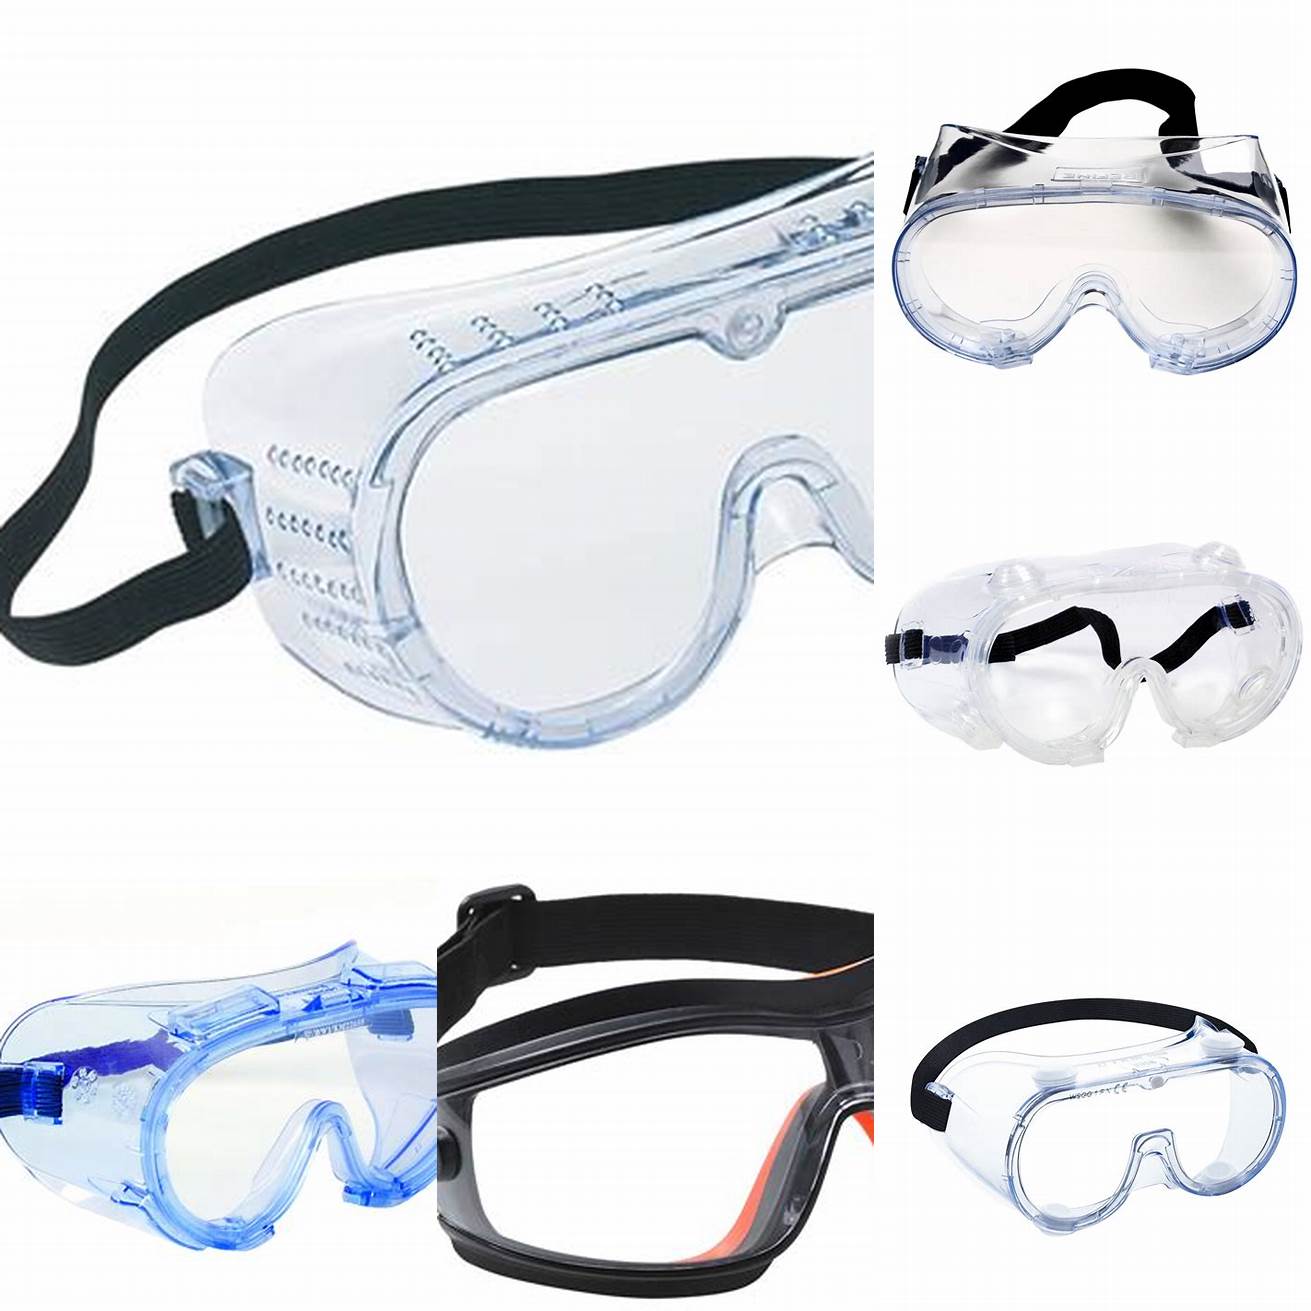 A pair of safety goggles